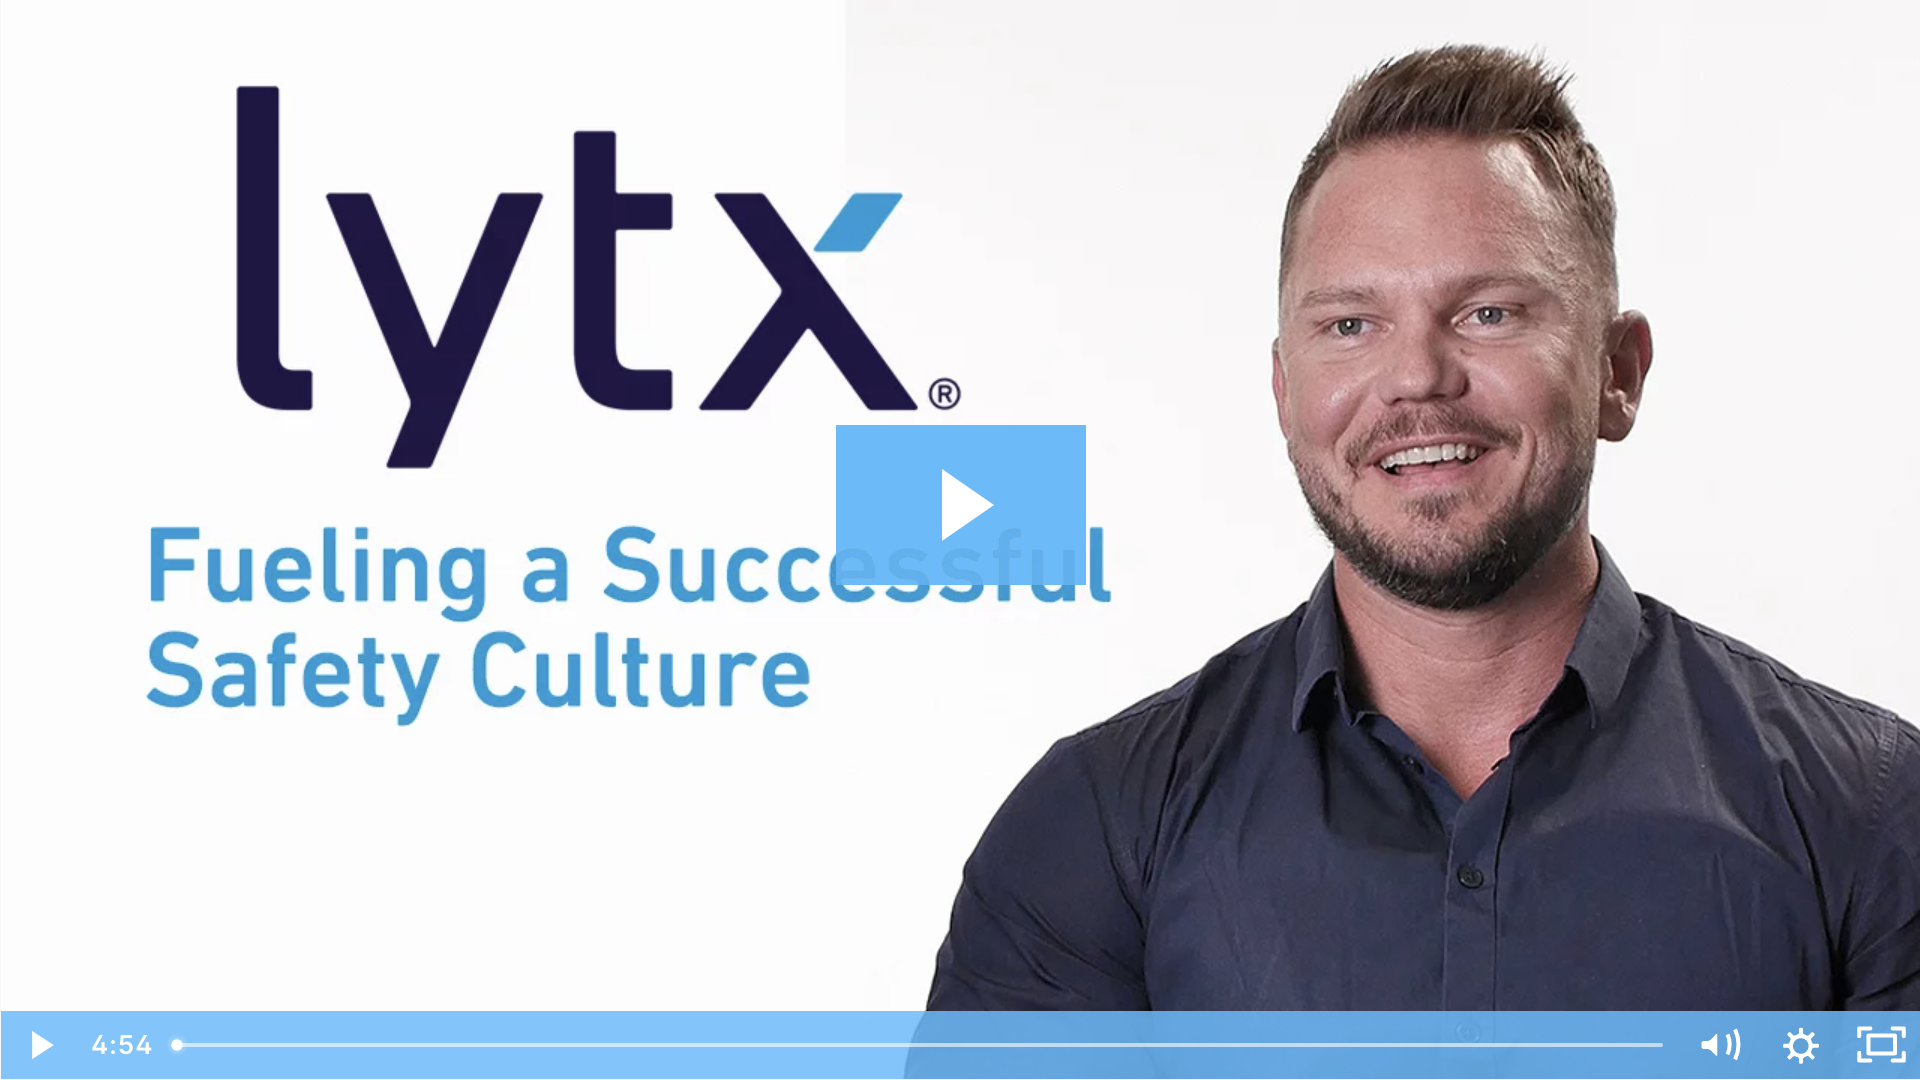 Video Fueling a Successful Safety Culture